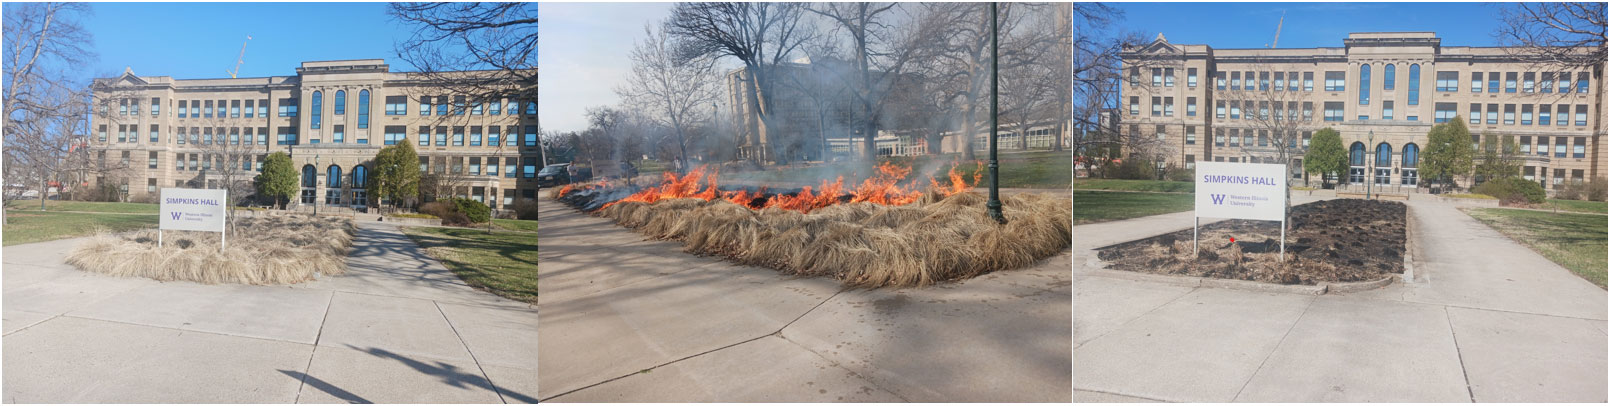 Before and after of controlled burn in front of Simpkins Hall